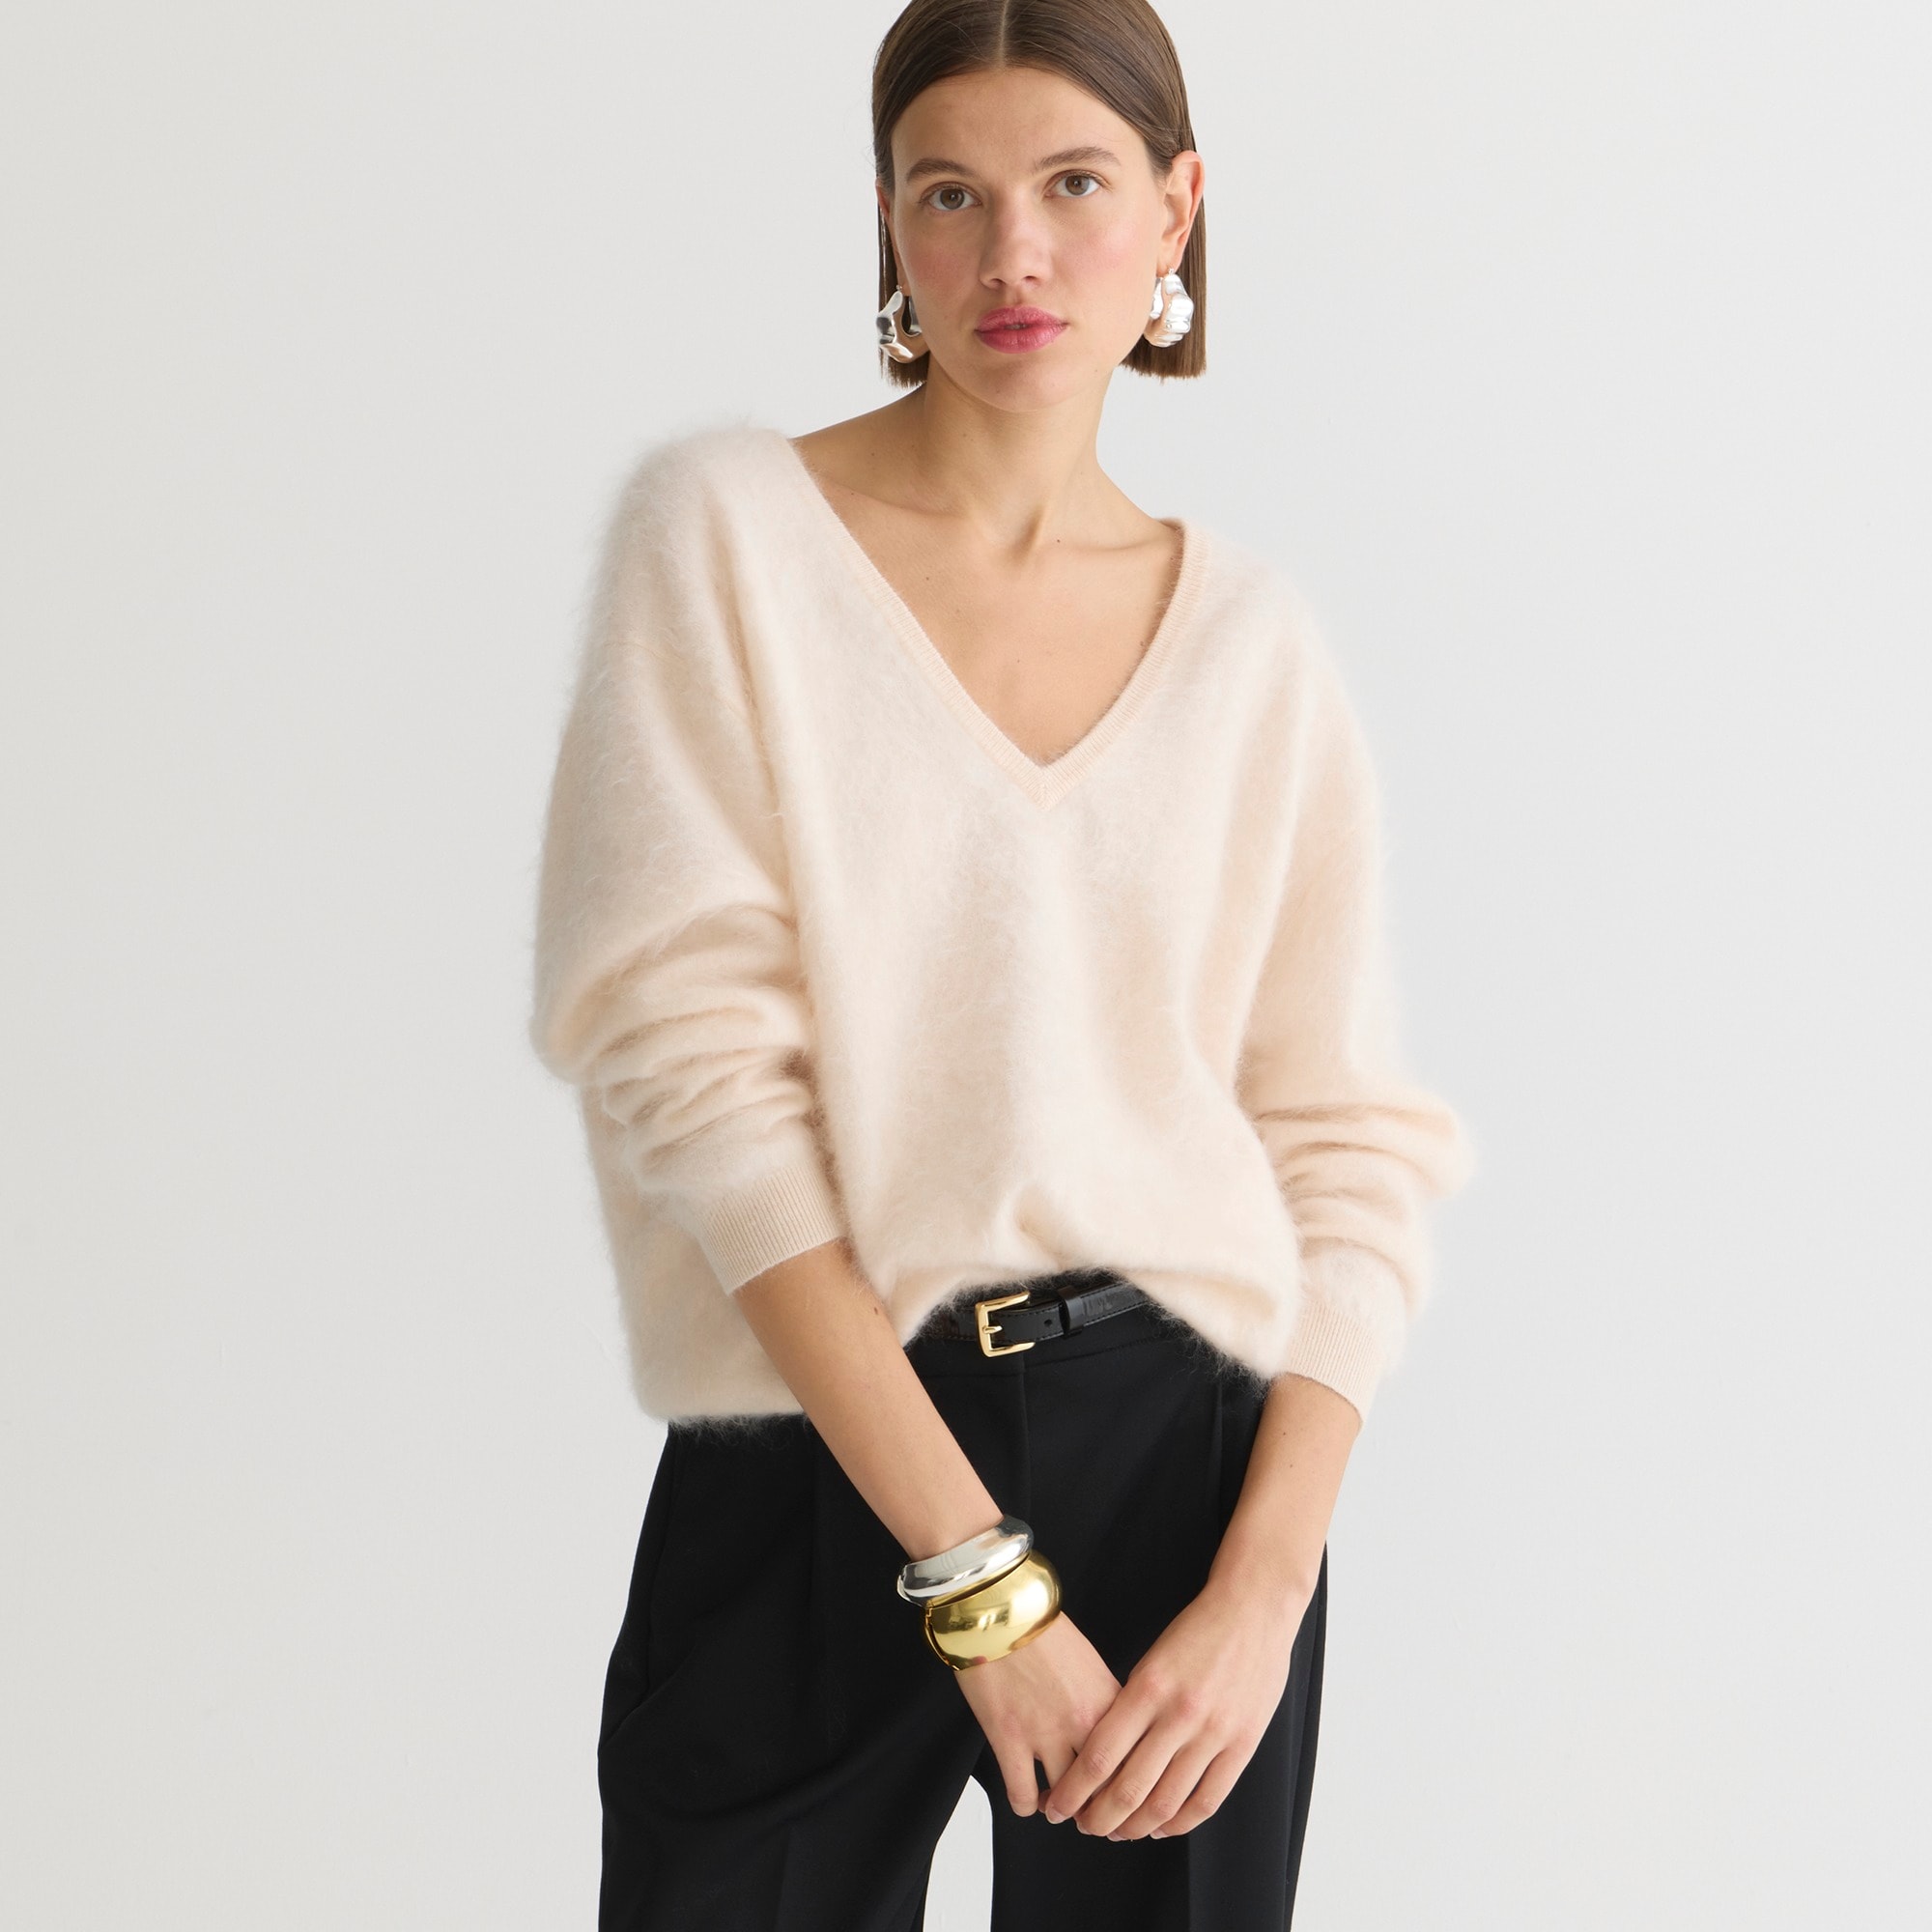 The Best Items to Buy From the J.Crew Fall Collection | Who What Wear